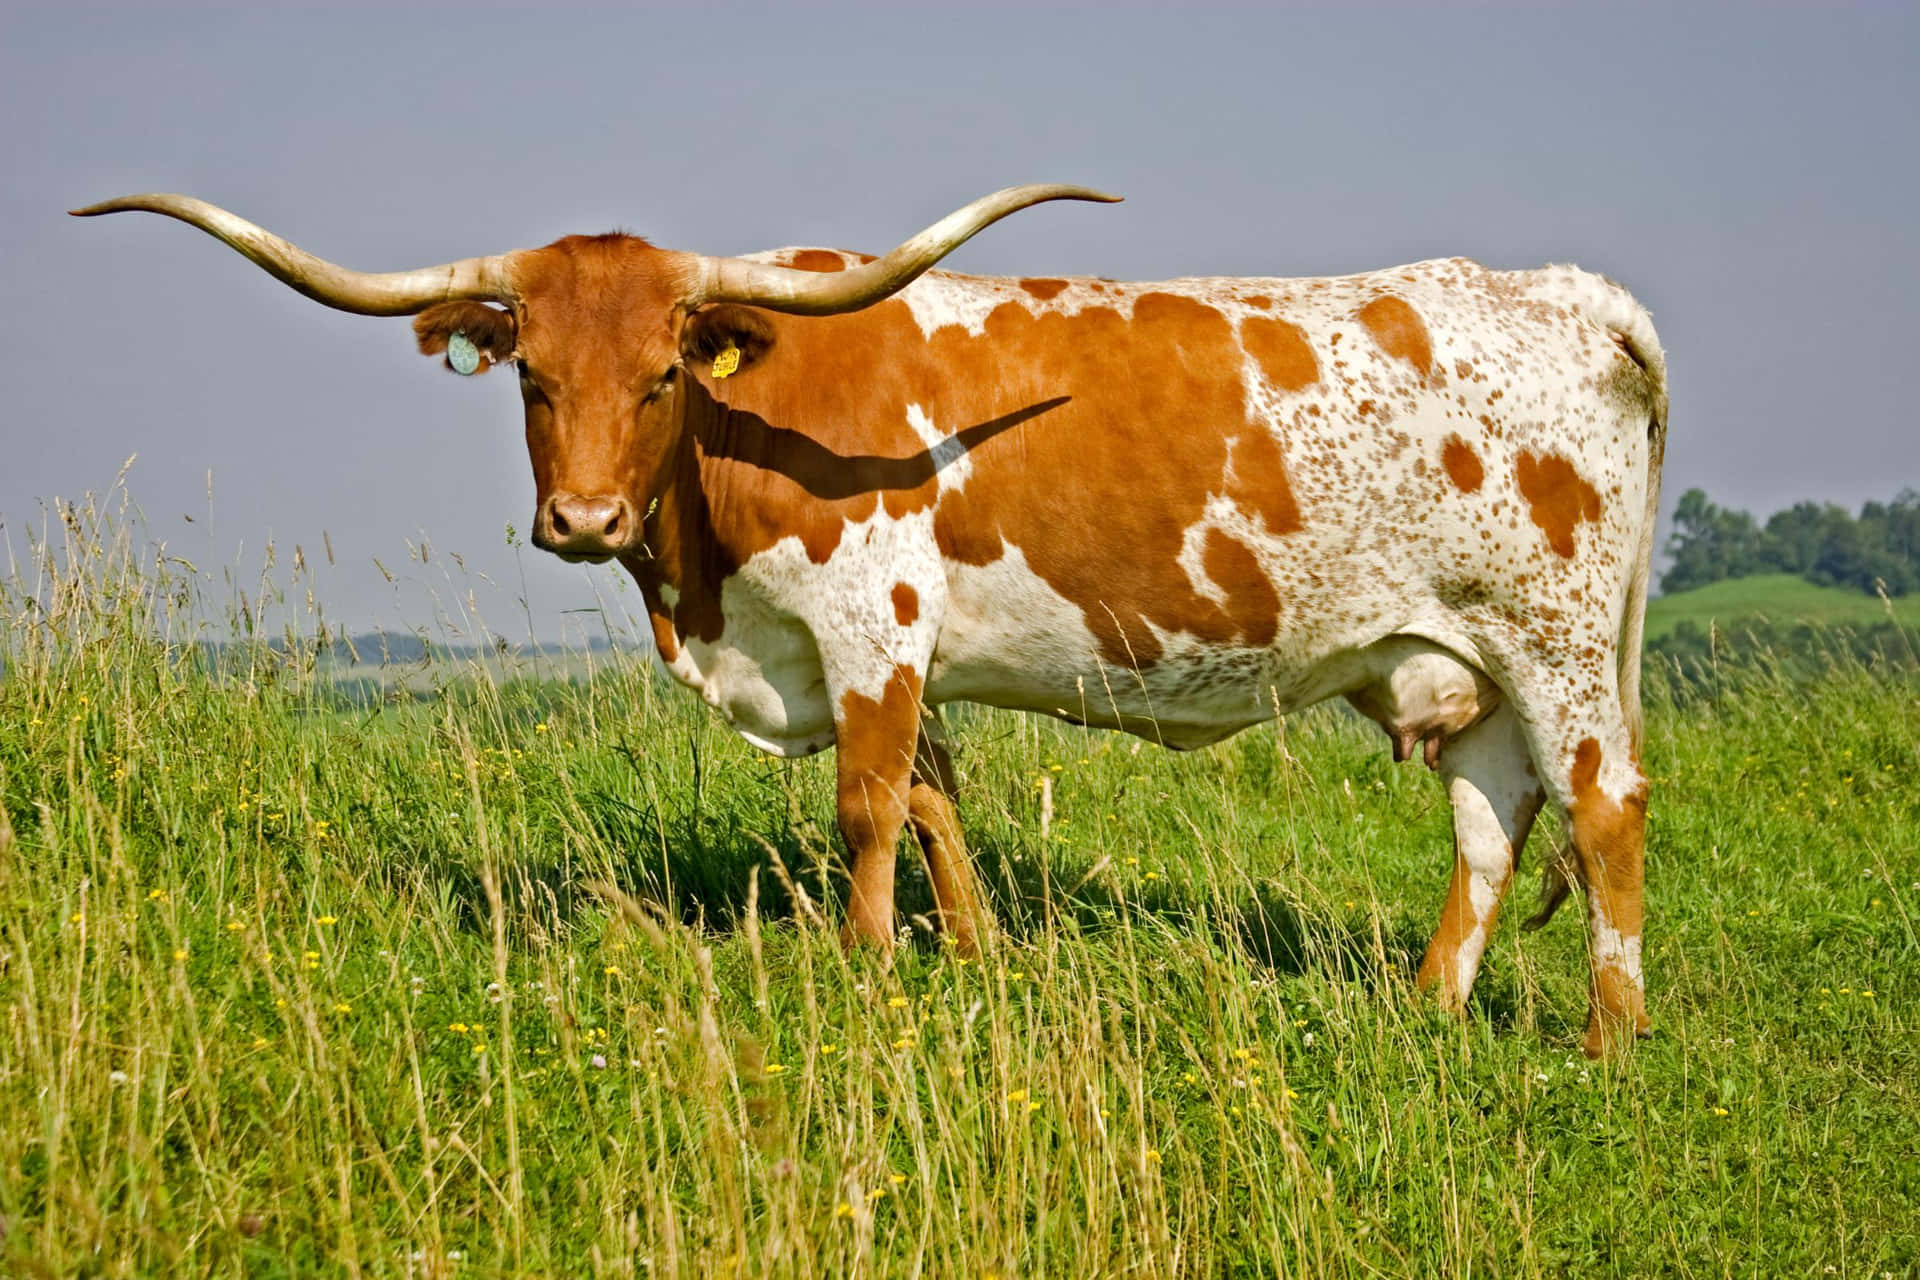 Majestic Longhorn Cattle in the Countryside